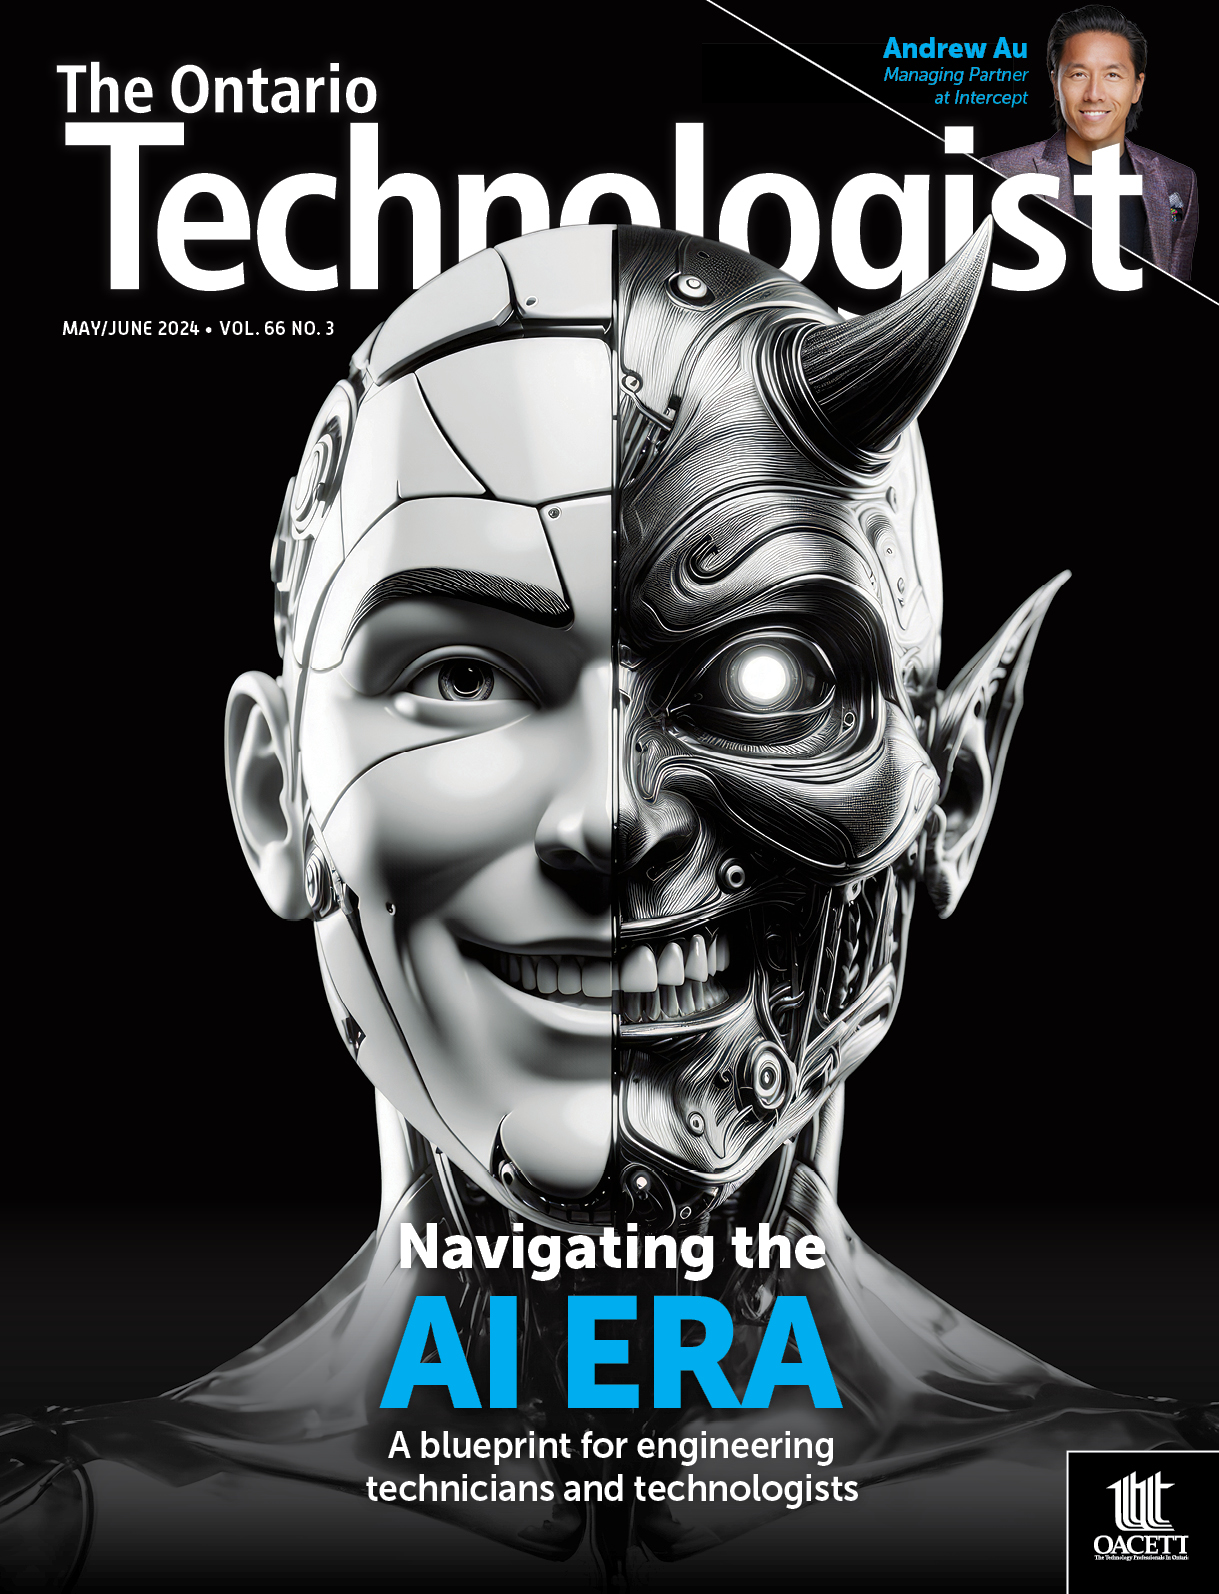 Magazine cover titled "The Ontario Technologist" featuring a split-face image of a human and robotic figure, with the headline "Navigating the AI Era" and a small inset photo of Andrew Au.